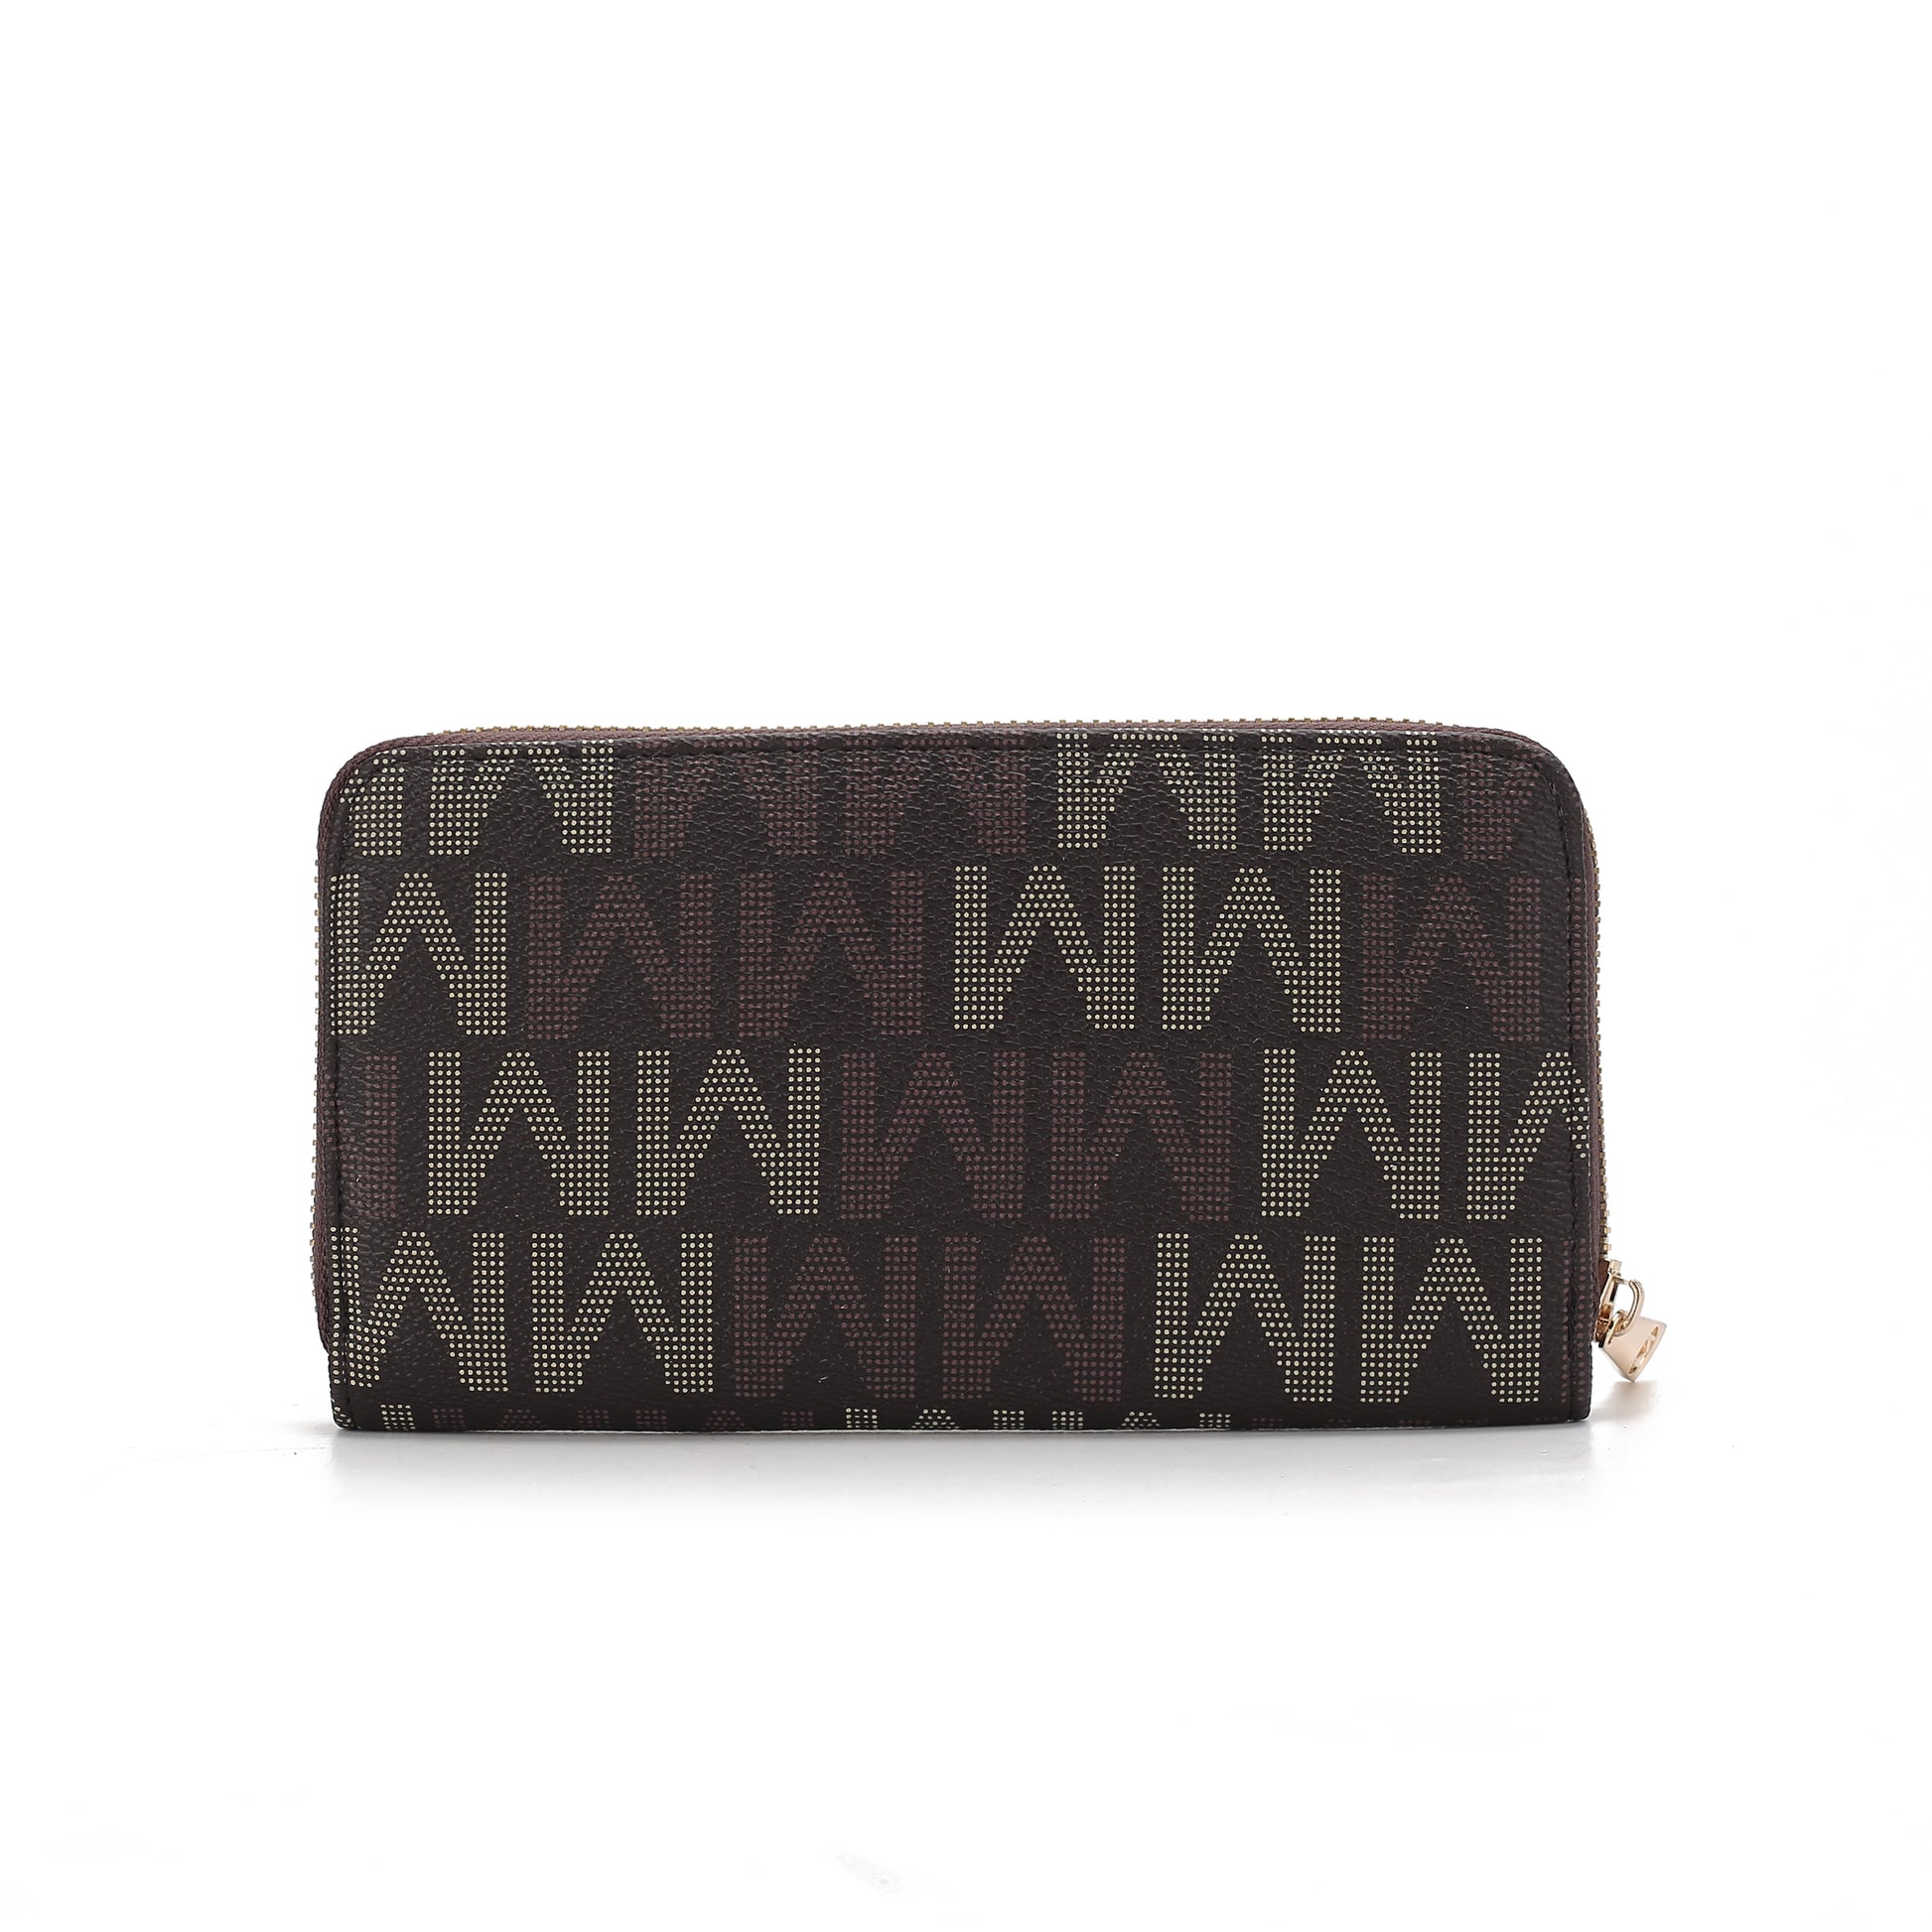 A Peyton Vegan Leather M Signature Women Wallet by Pink Orpheus, with functionality and a logo on it.